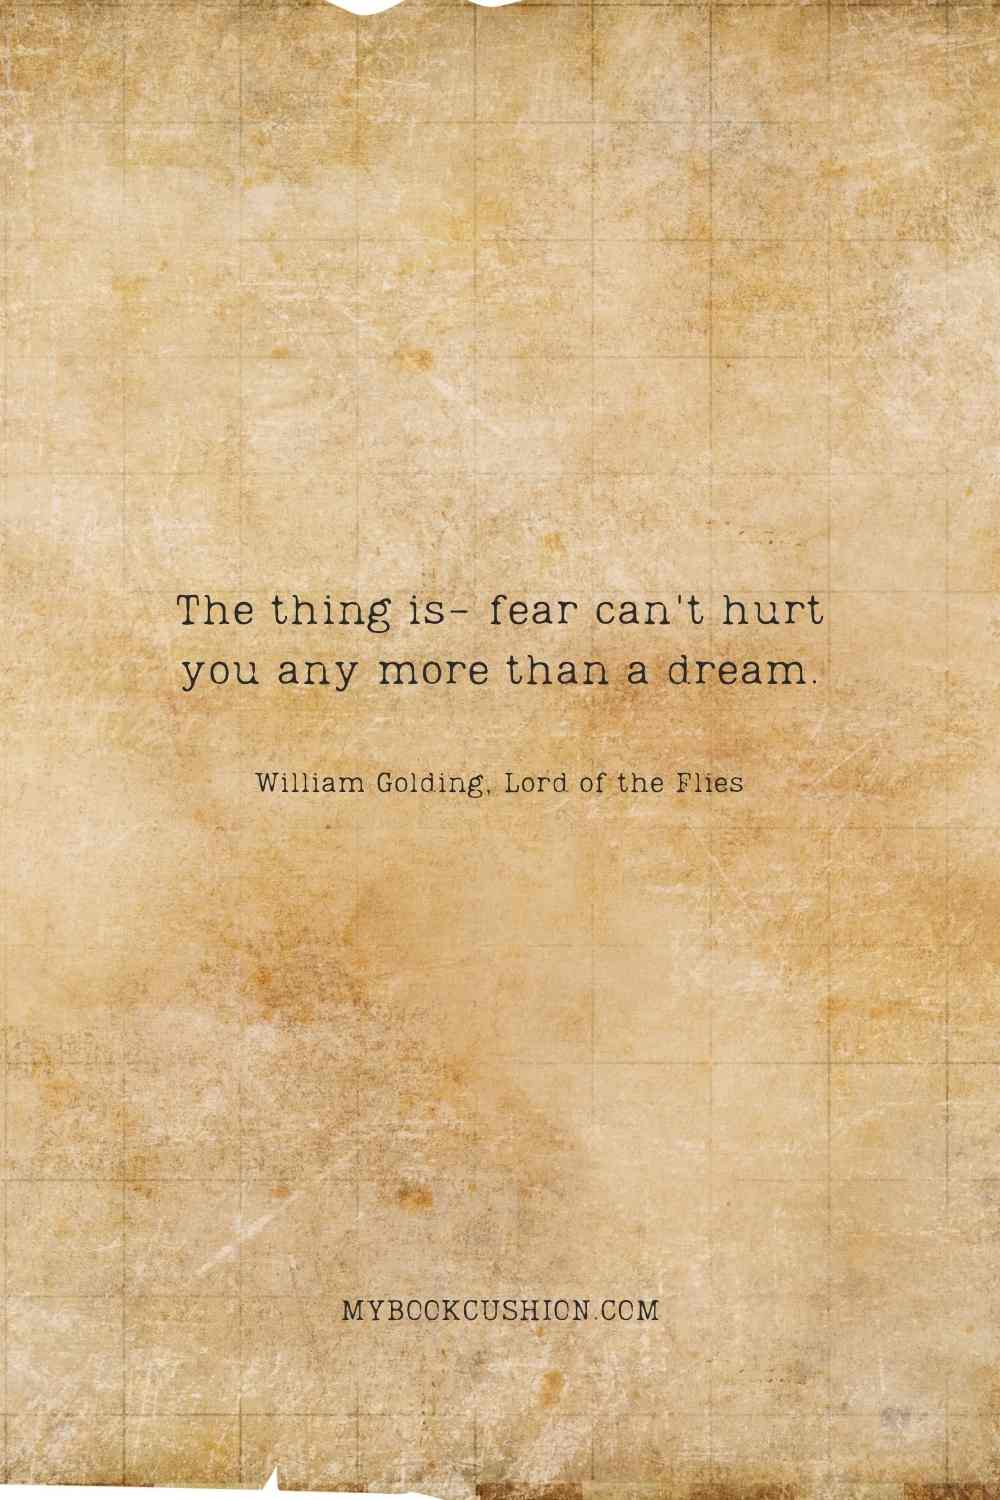 The thing is- fear can't hurt you any more than a dream. - William Golding, Lord of the Flies